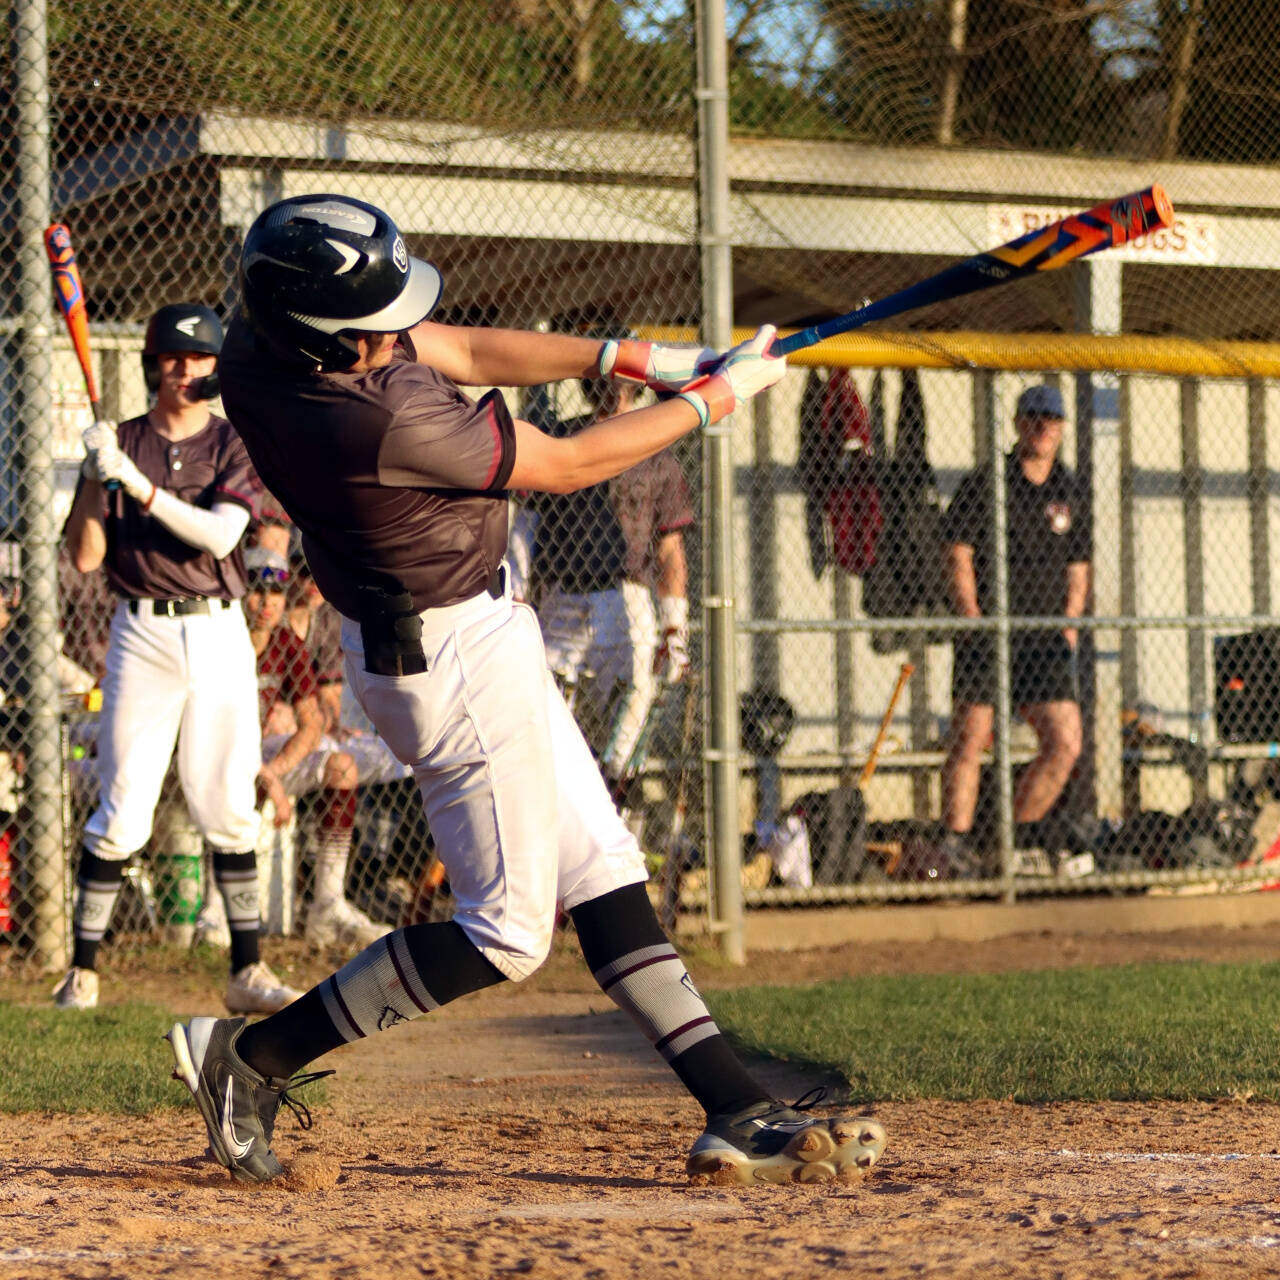 PHOTO BY HAILEY BLANCAS Montesano senior Jaxson Wilson collects a base hit during a 10-0 win over University Prep on Monday in Montesano.